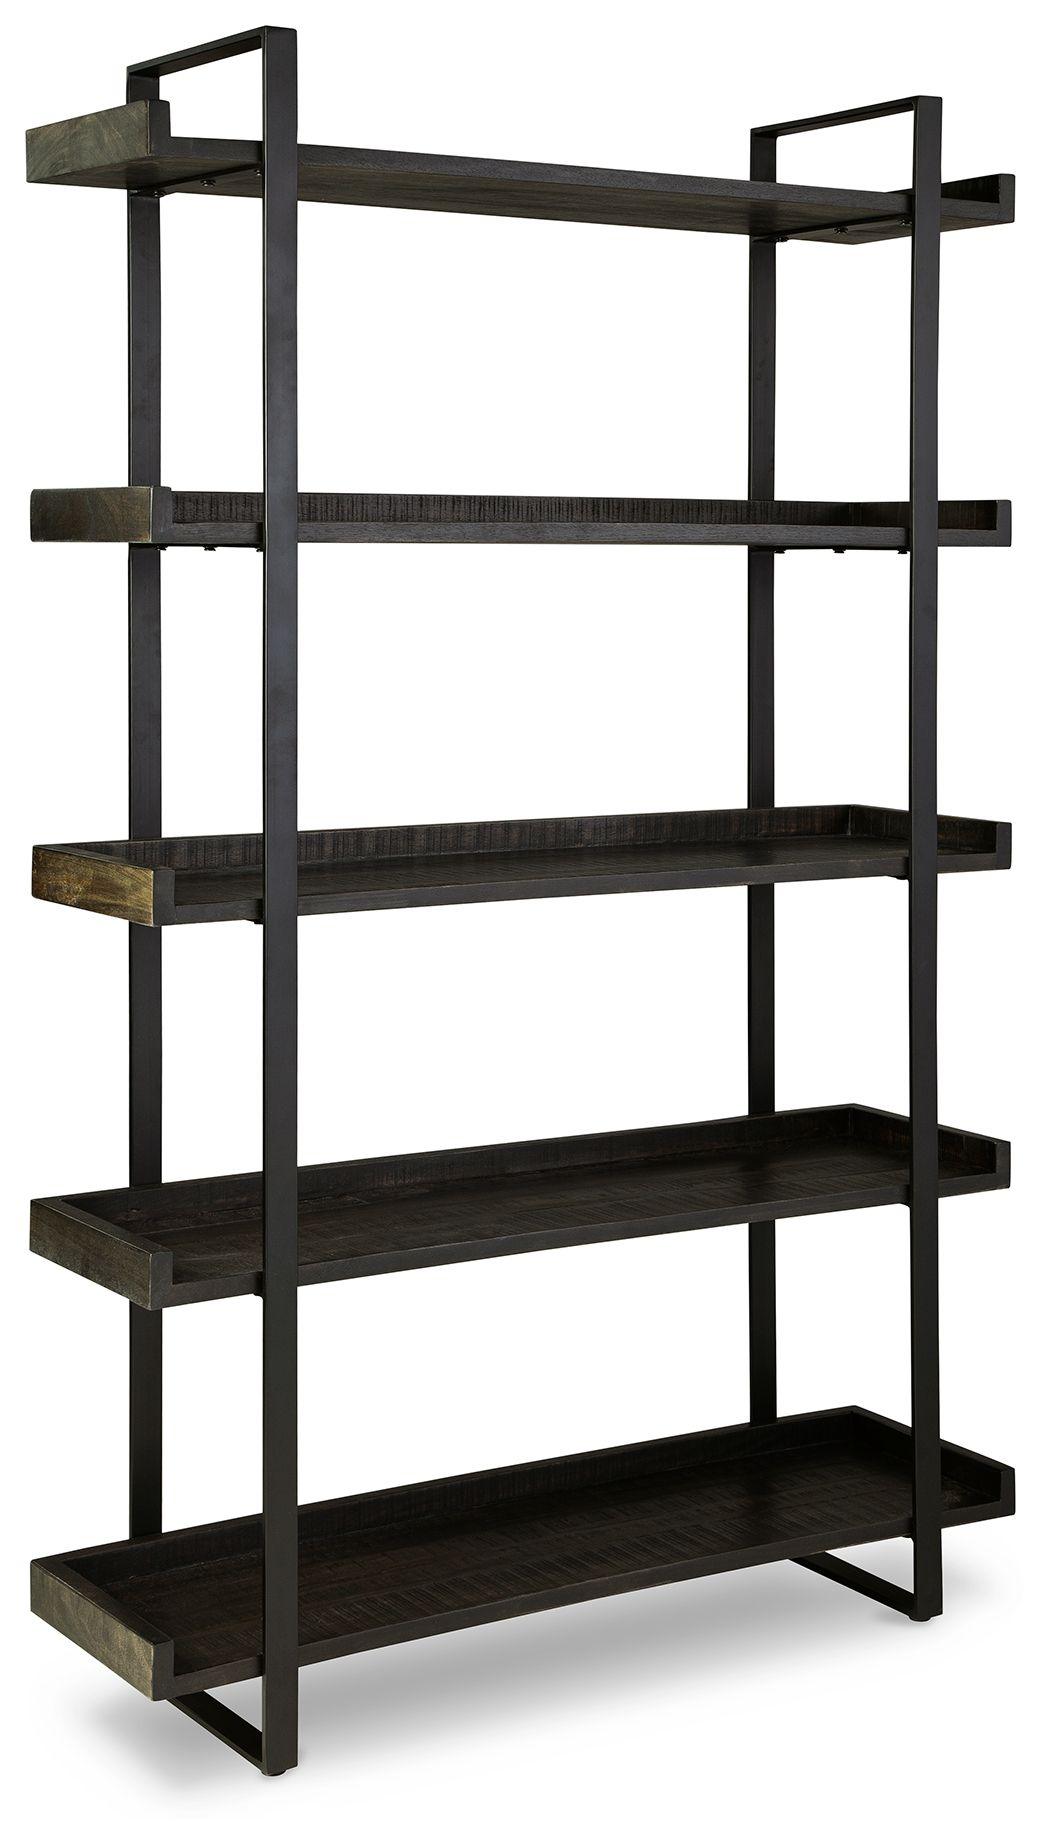 Kevmart - Grayish Brown / Black - Bookcase Tony's Home Furnishings Furniture. Beds. Dressers. Sofas.